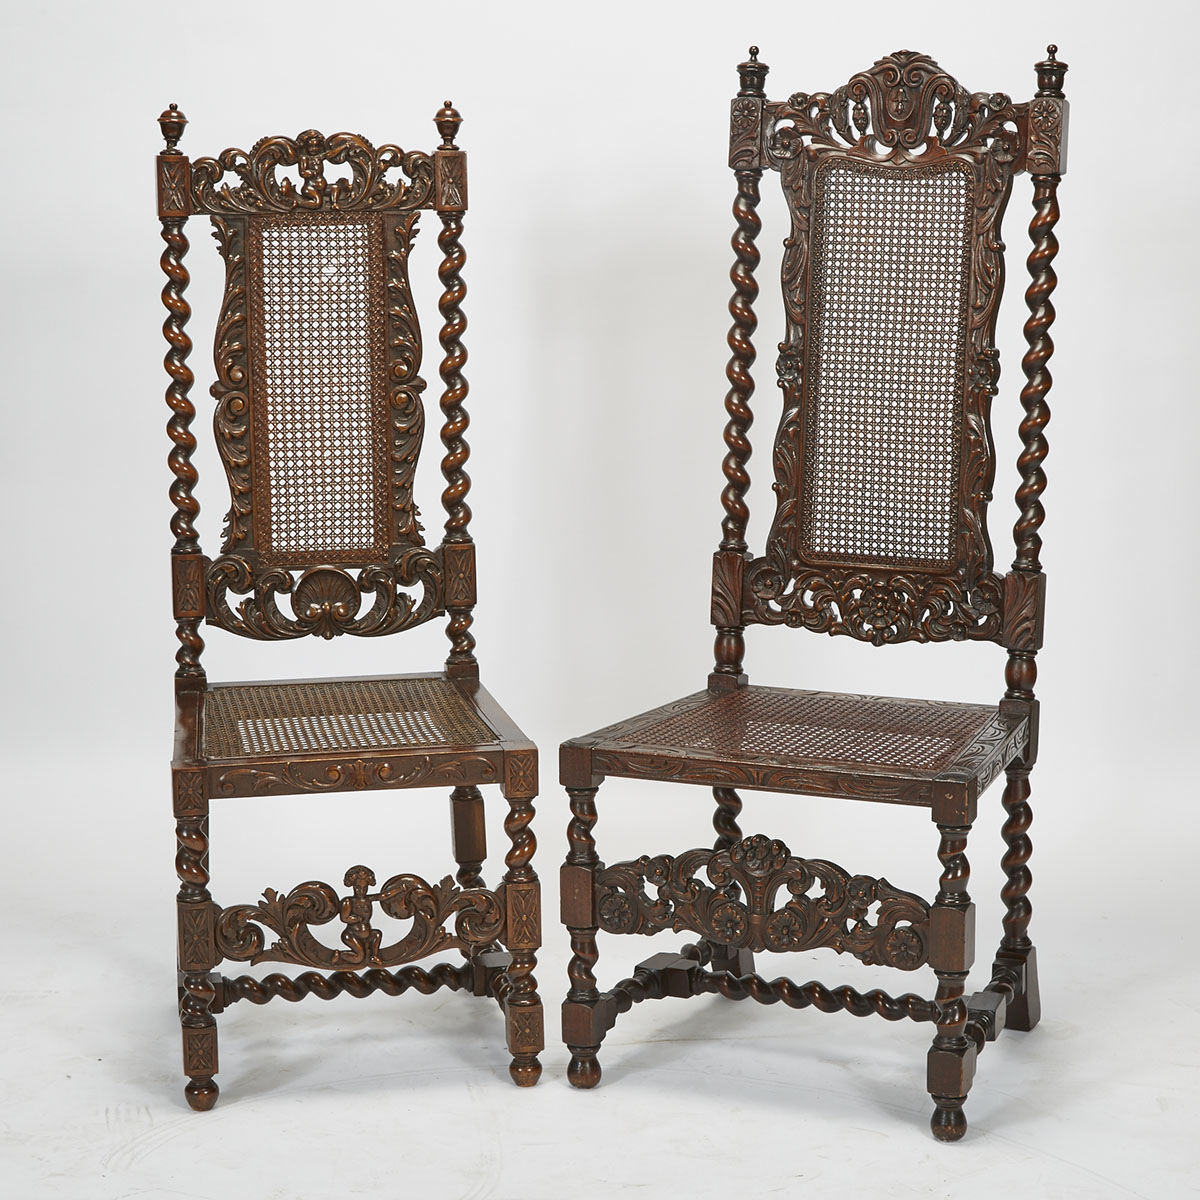 Near Pair of Victorian Renaissance Revival Carved Oak Hall Chairs, late 19th century